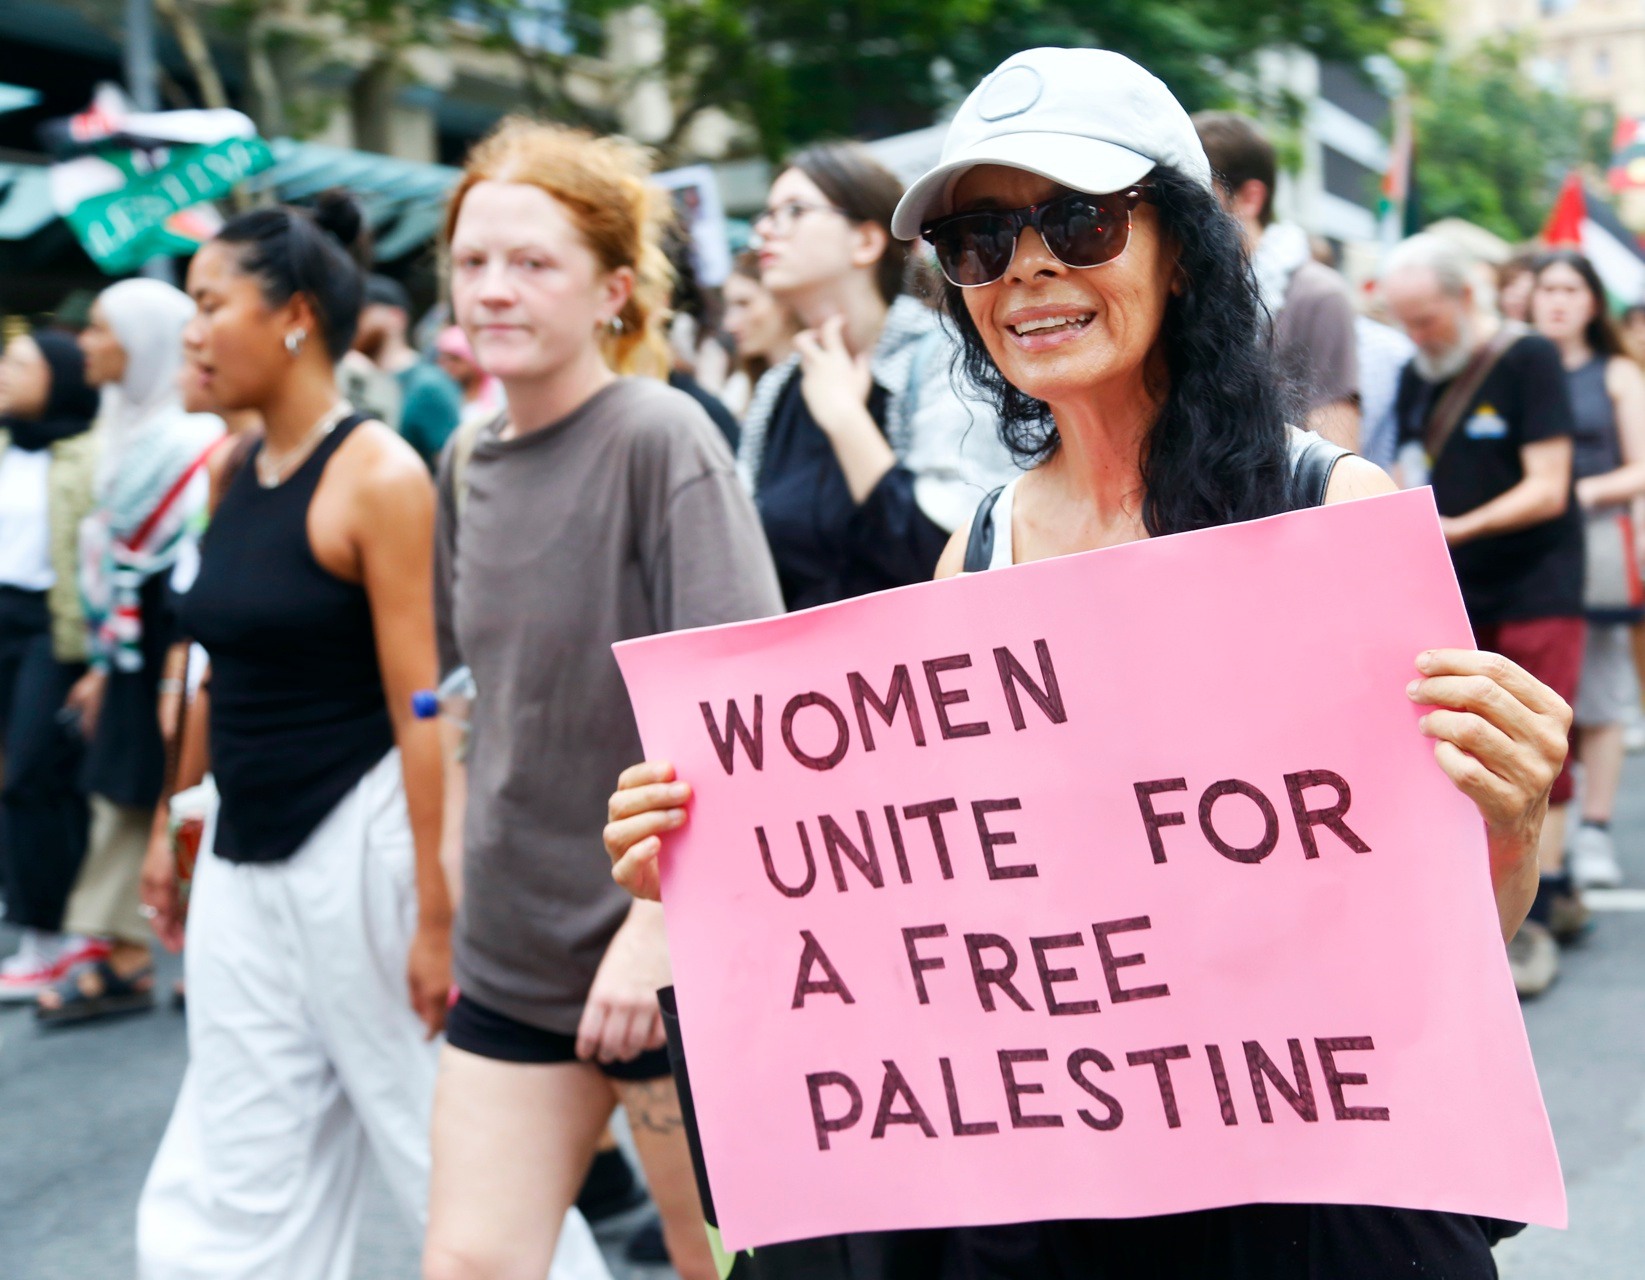 The protest in Meanjin/Brisbane on March 3 had a "solidarity with Palestinian women" theme.